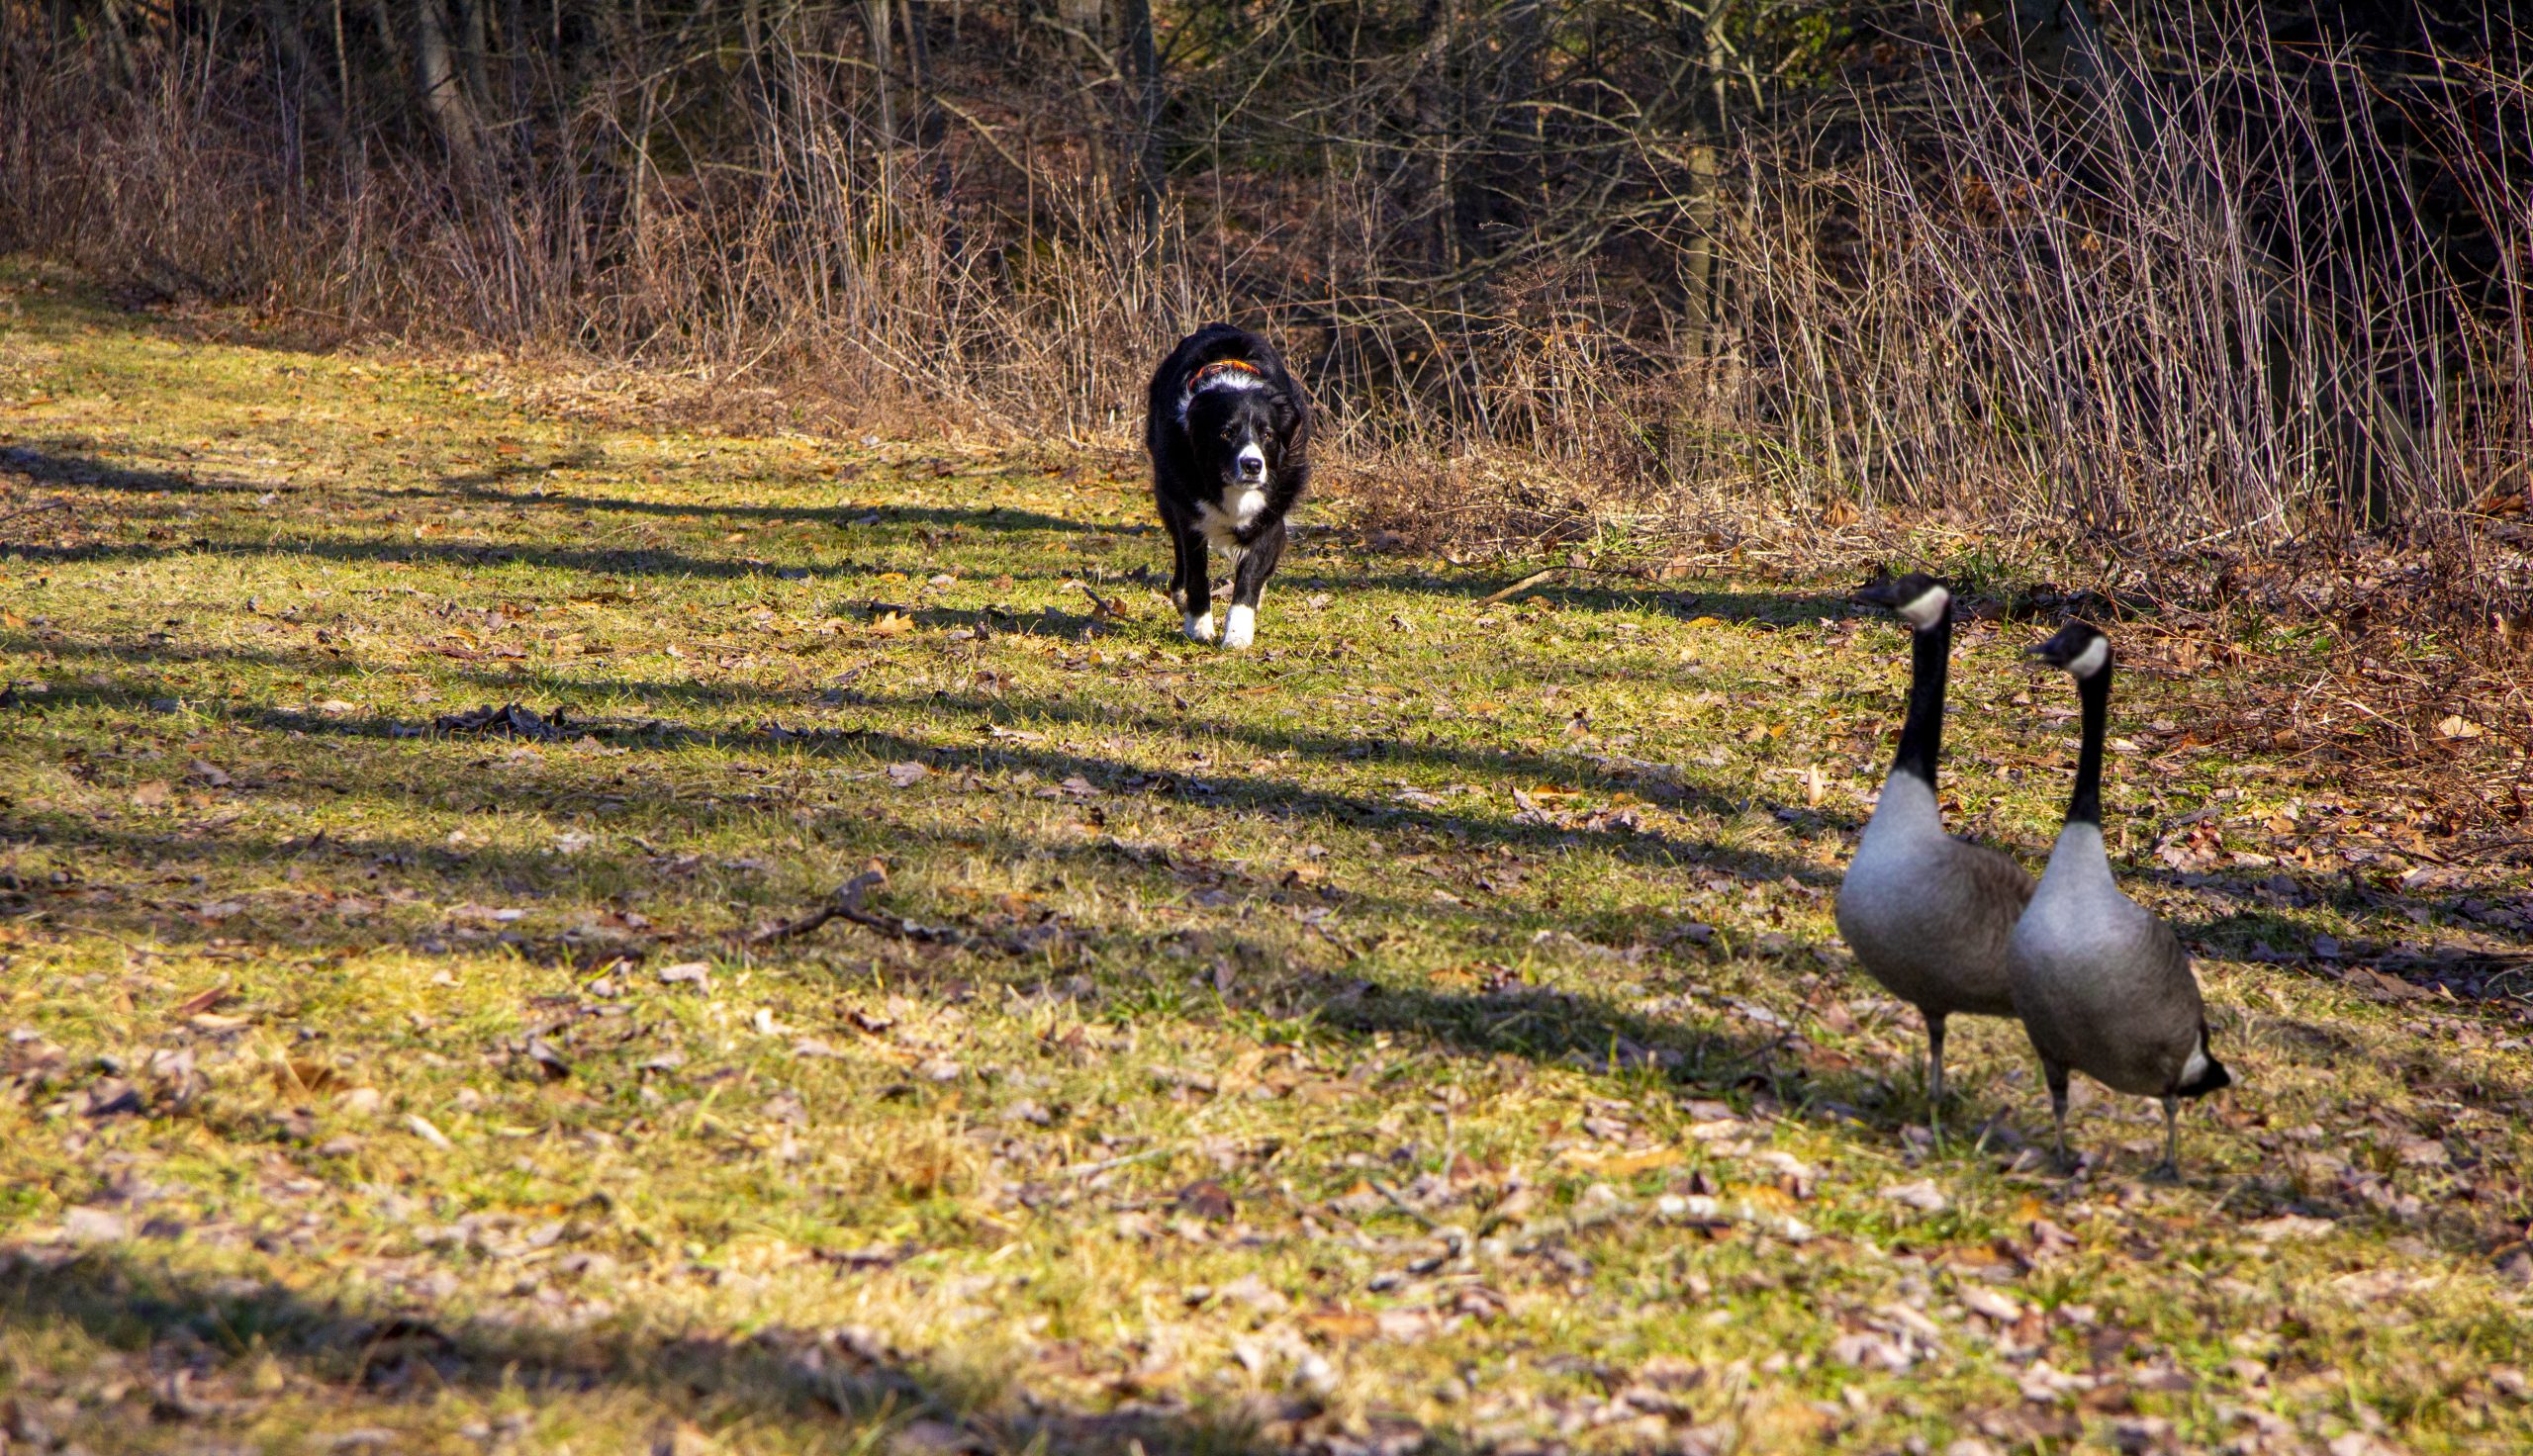 Border collies are perceived as predatores